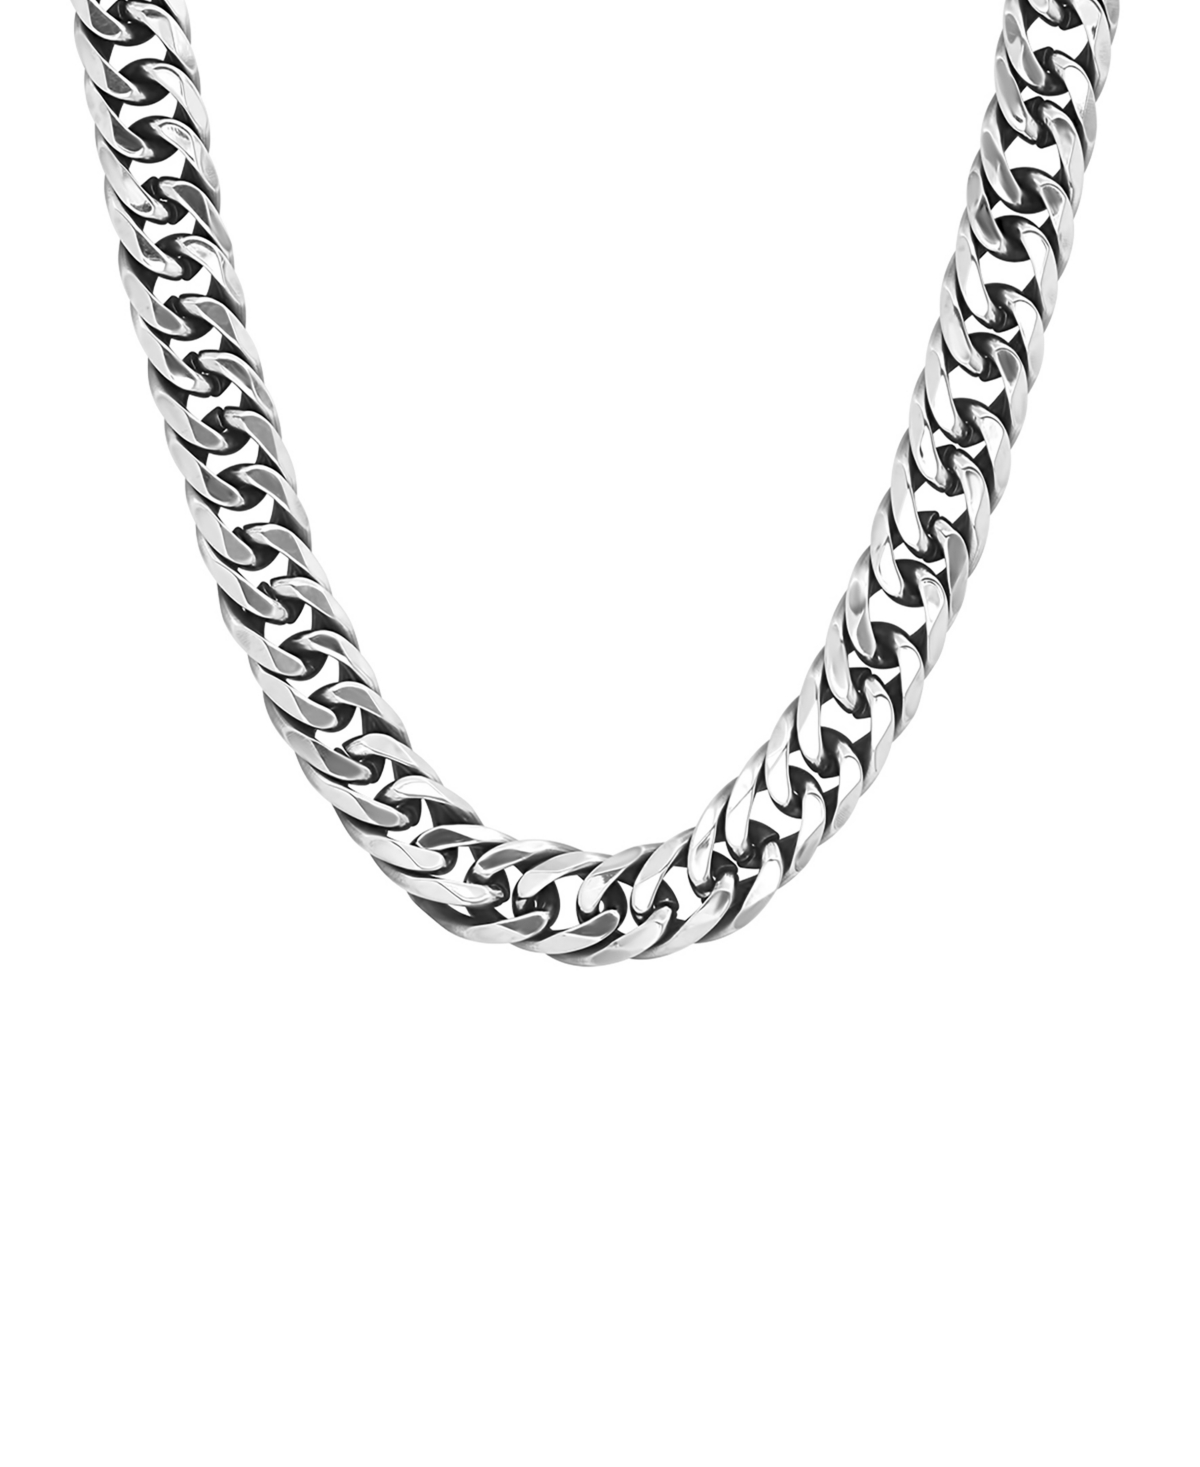 Men's Stainless Steel Cuban Link Chain Necklaces - Silver-tone